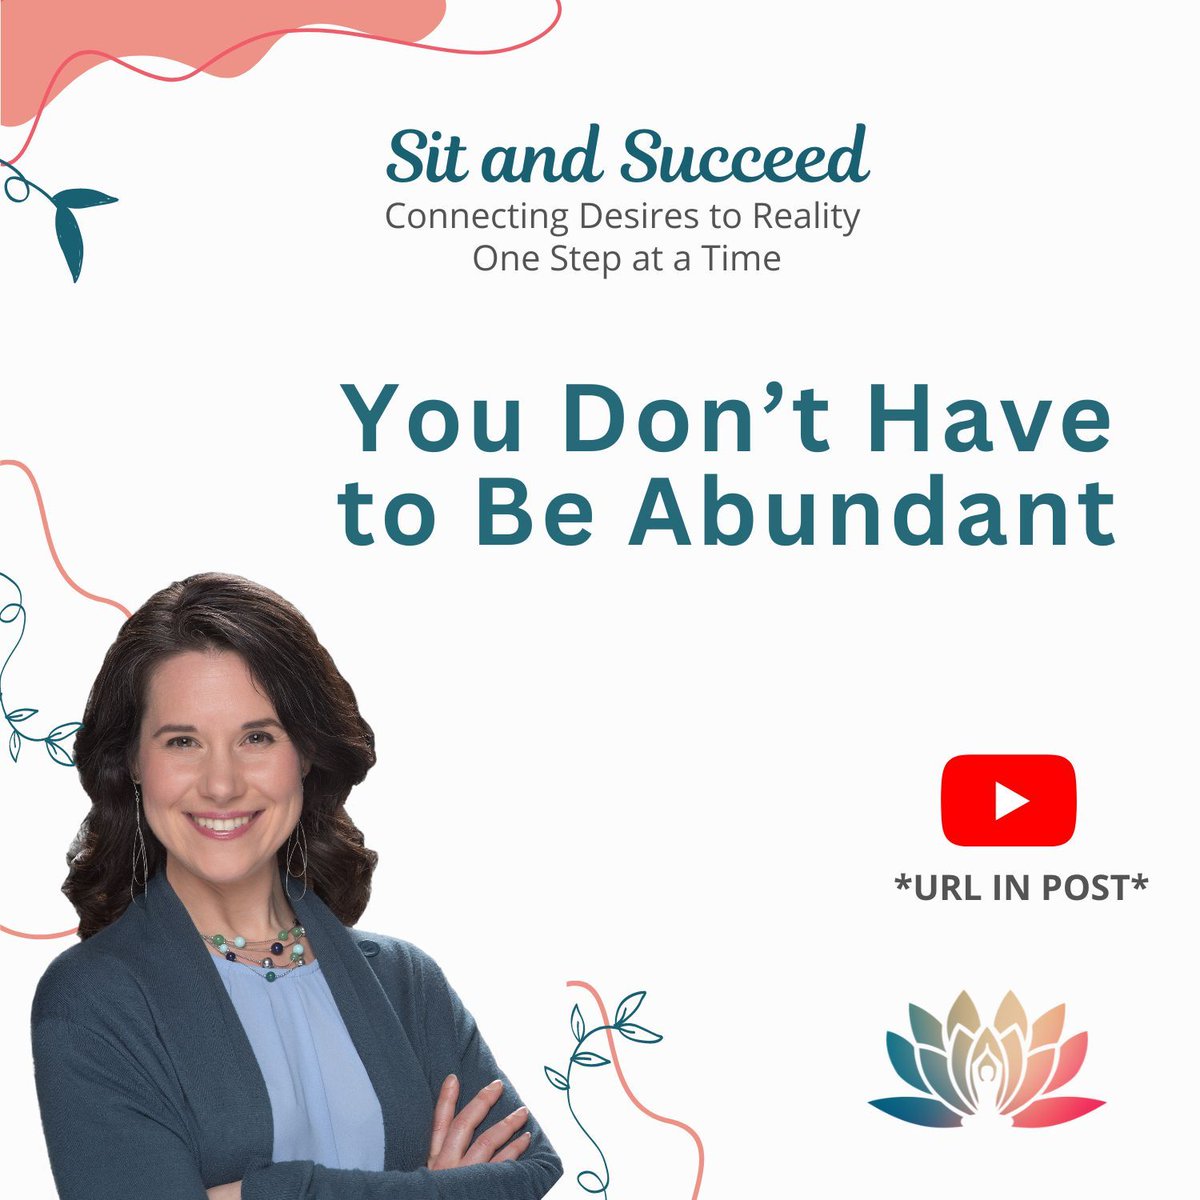 You Don’t Have to Be #Abundant

There are no universal requirements on who you need to be and how. Those decisions can be made on an individual level based on what your soul intends to experience in this life good or bad.

youtu.be/m93kT1CkFdE

#avitalmiller #abundant